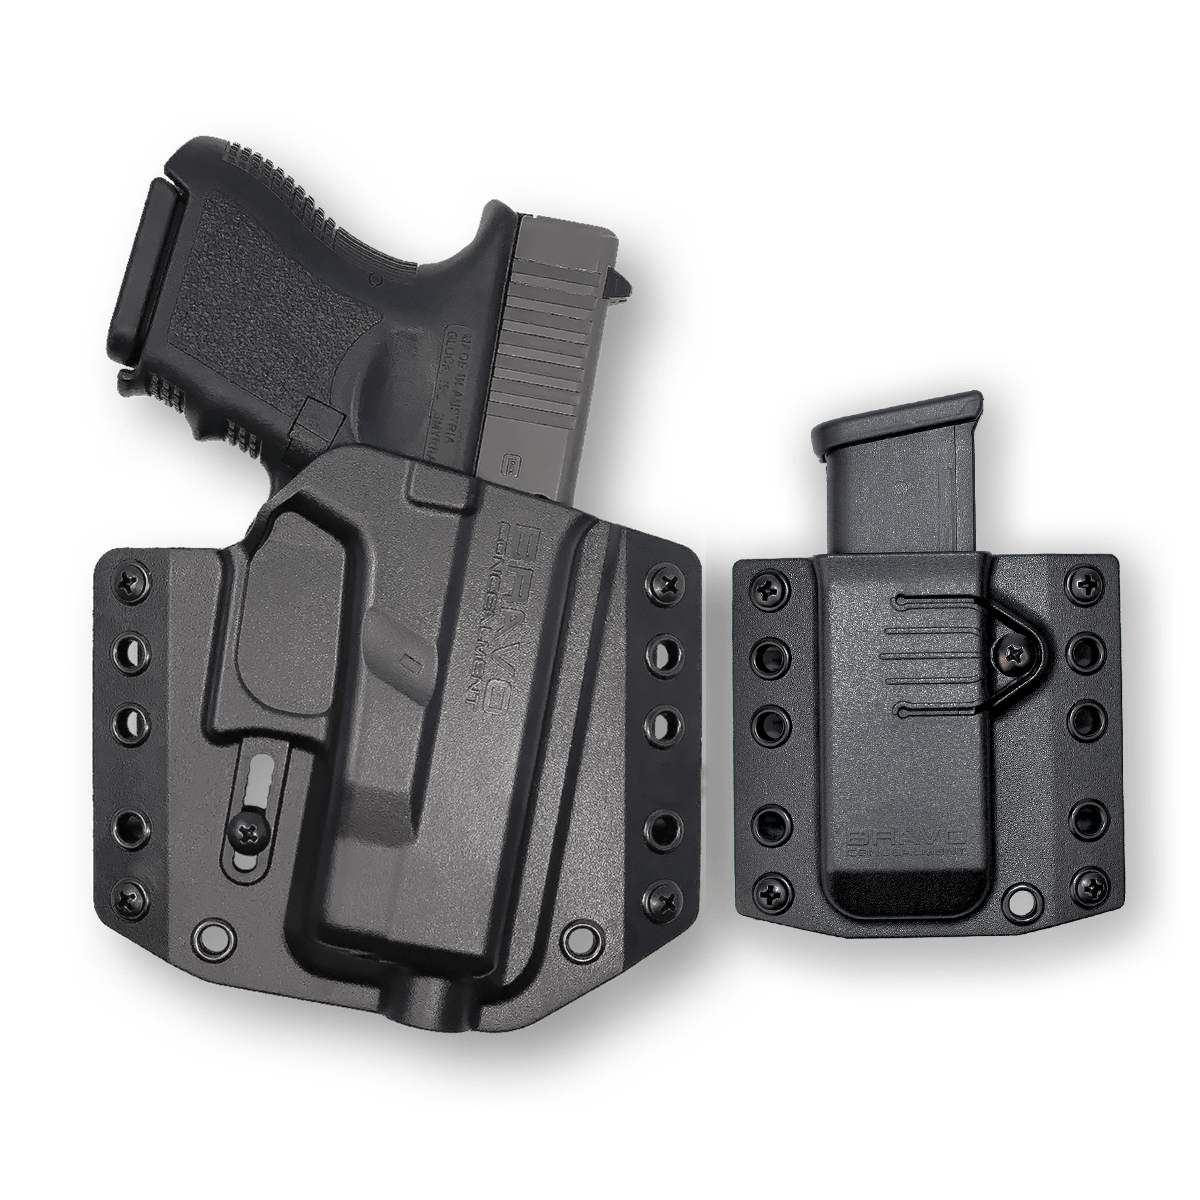 Glock 26 GEN 5 9mm Constitutional Carry with Holster · DK Firearms